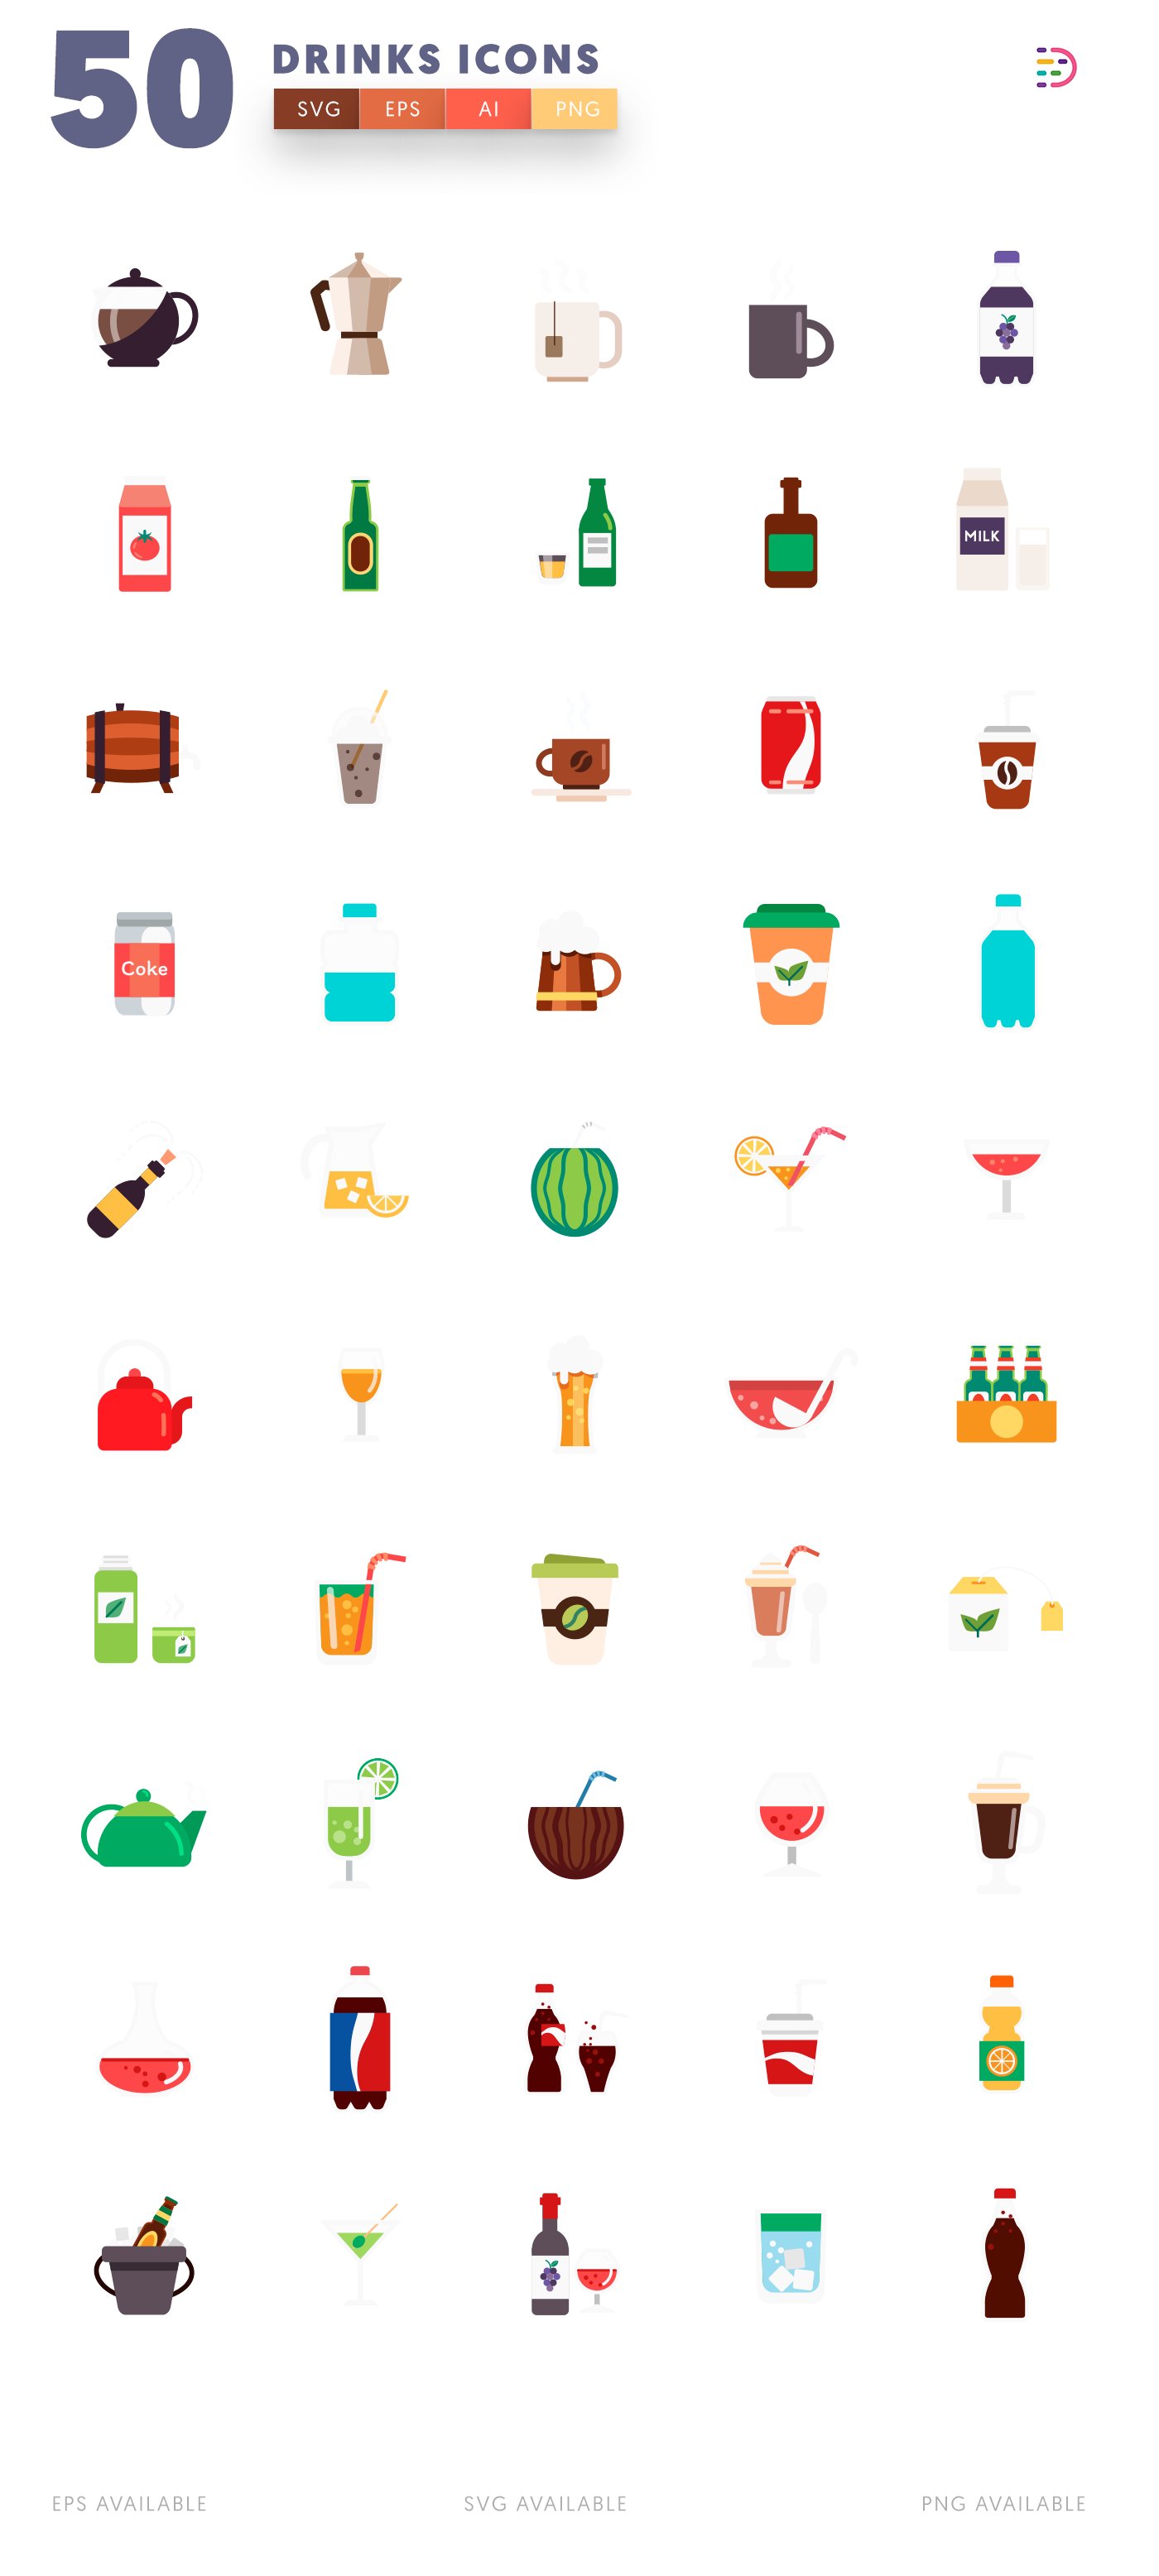 50 drinks icons cover 3 919